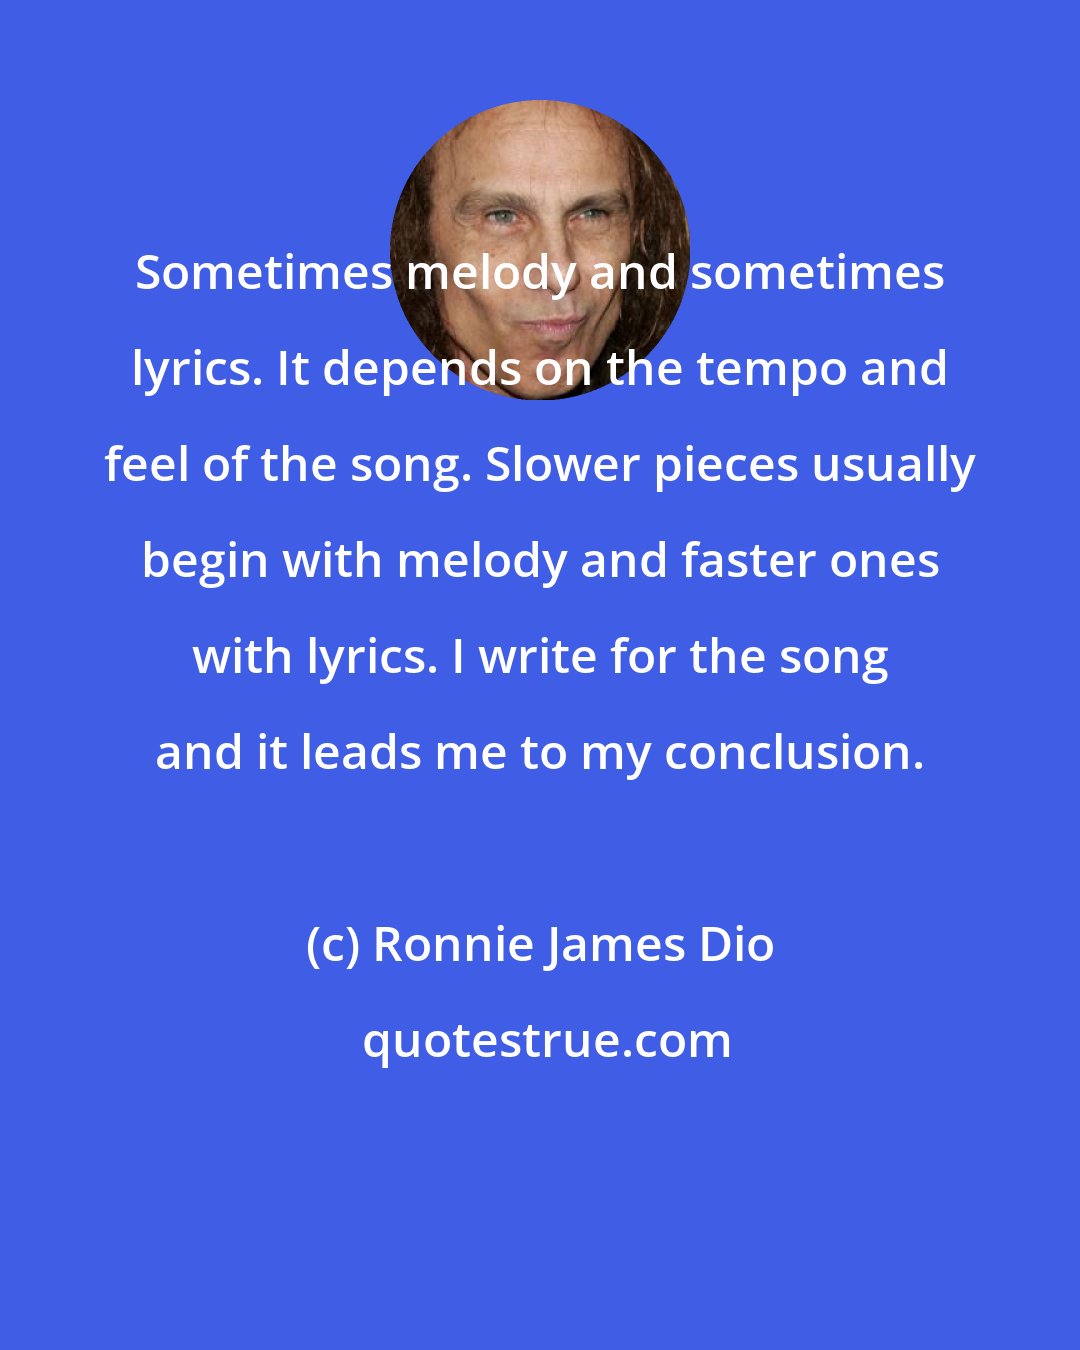 Ronnie James Dio: Sometimes melody and sometimes lyrics. It depends on the tempo and feel of the song. Slower pieces usually begin with melody and faster ones with lyrics. I write for the song and it leads me to my conclusion.